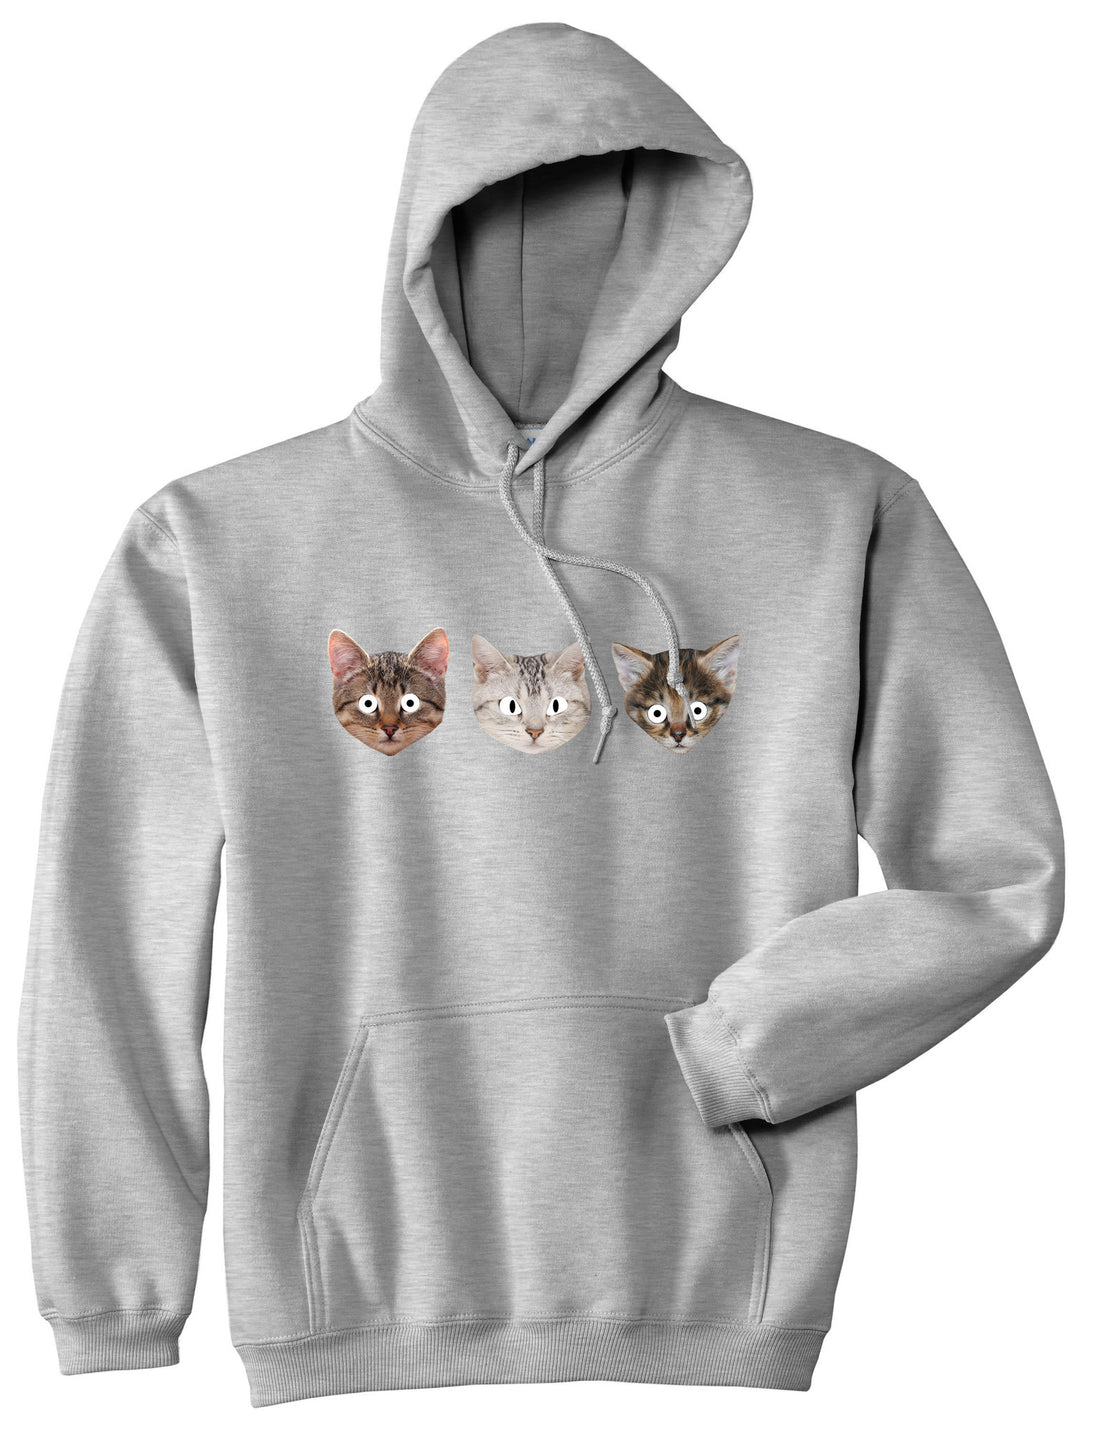 Cats Crazy Kittens Boys Kids Pullover Hoodie Hoody in Grey By Kings Of NY